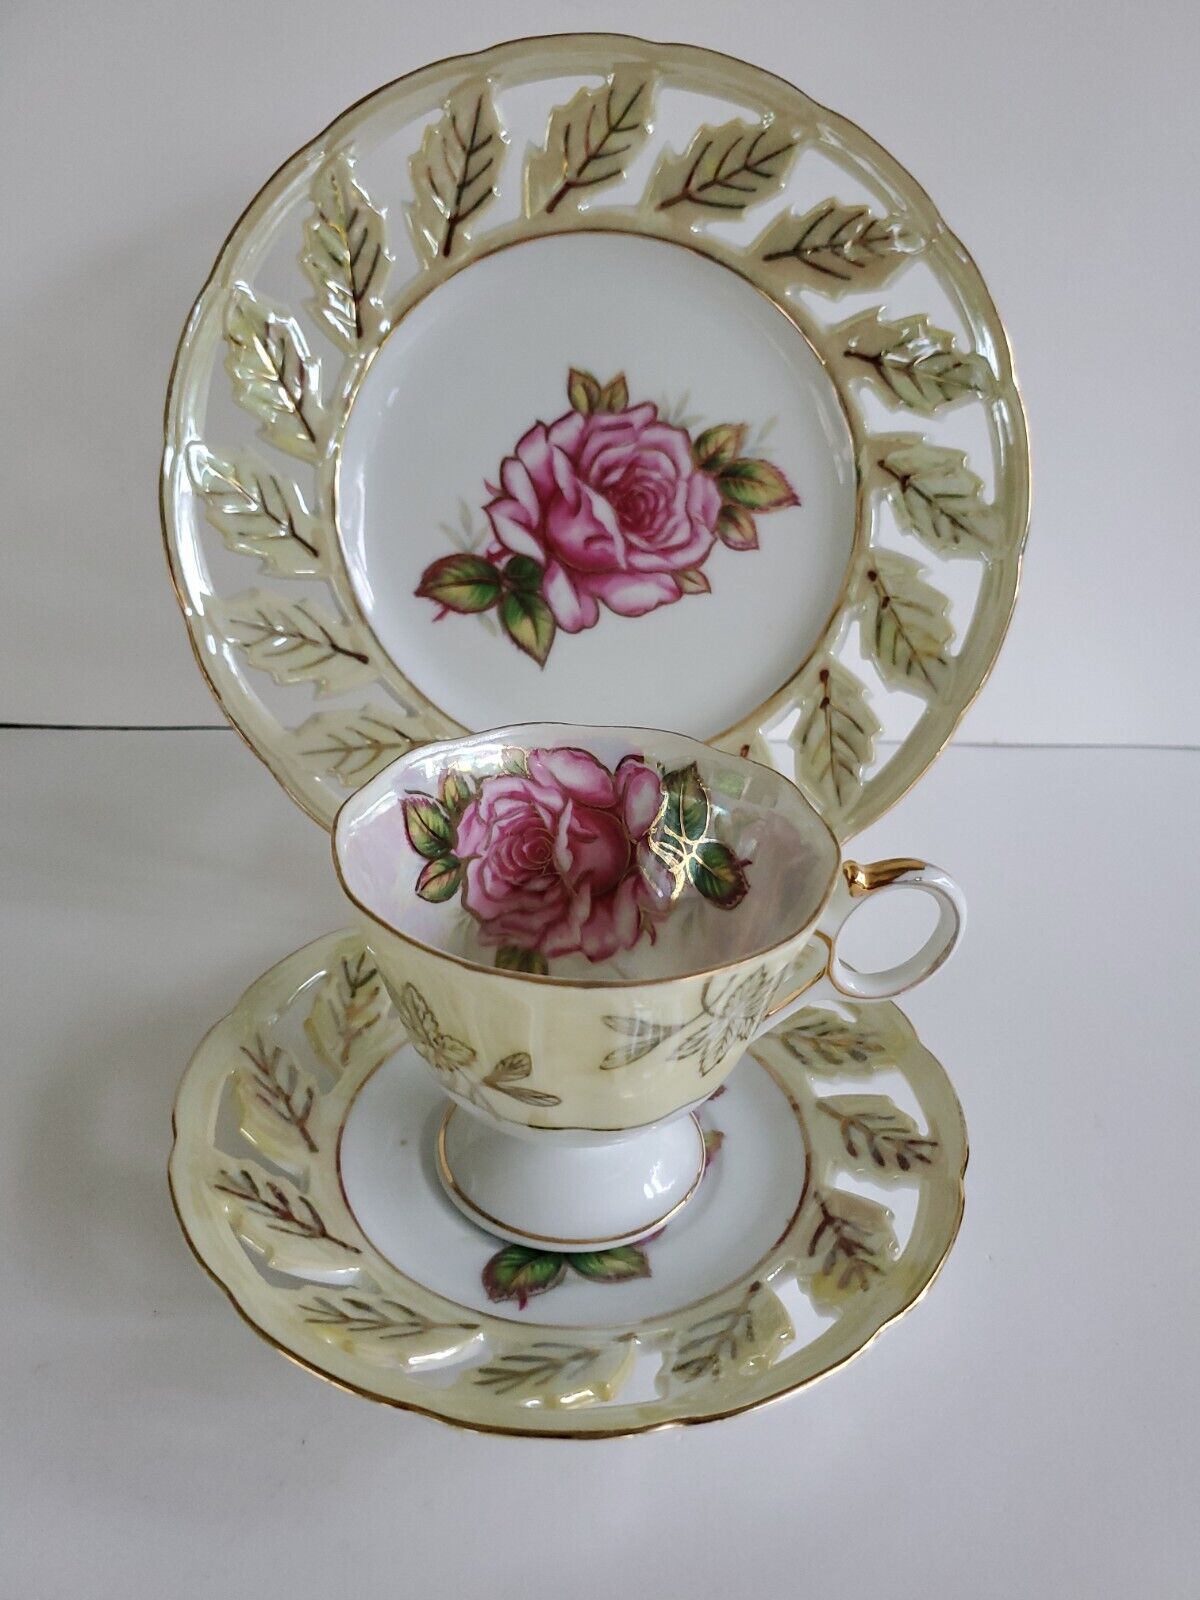 LM Royal Halsey Three-Piece Footed Teacup and Saucer Set Pink Roses Luster Gold 